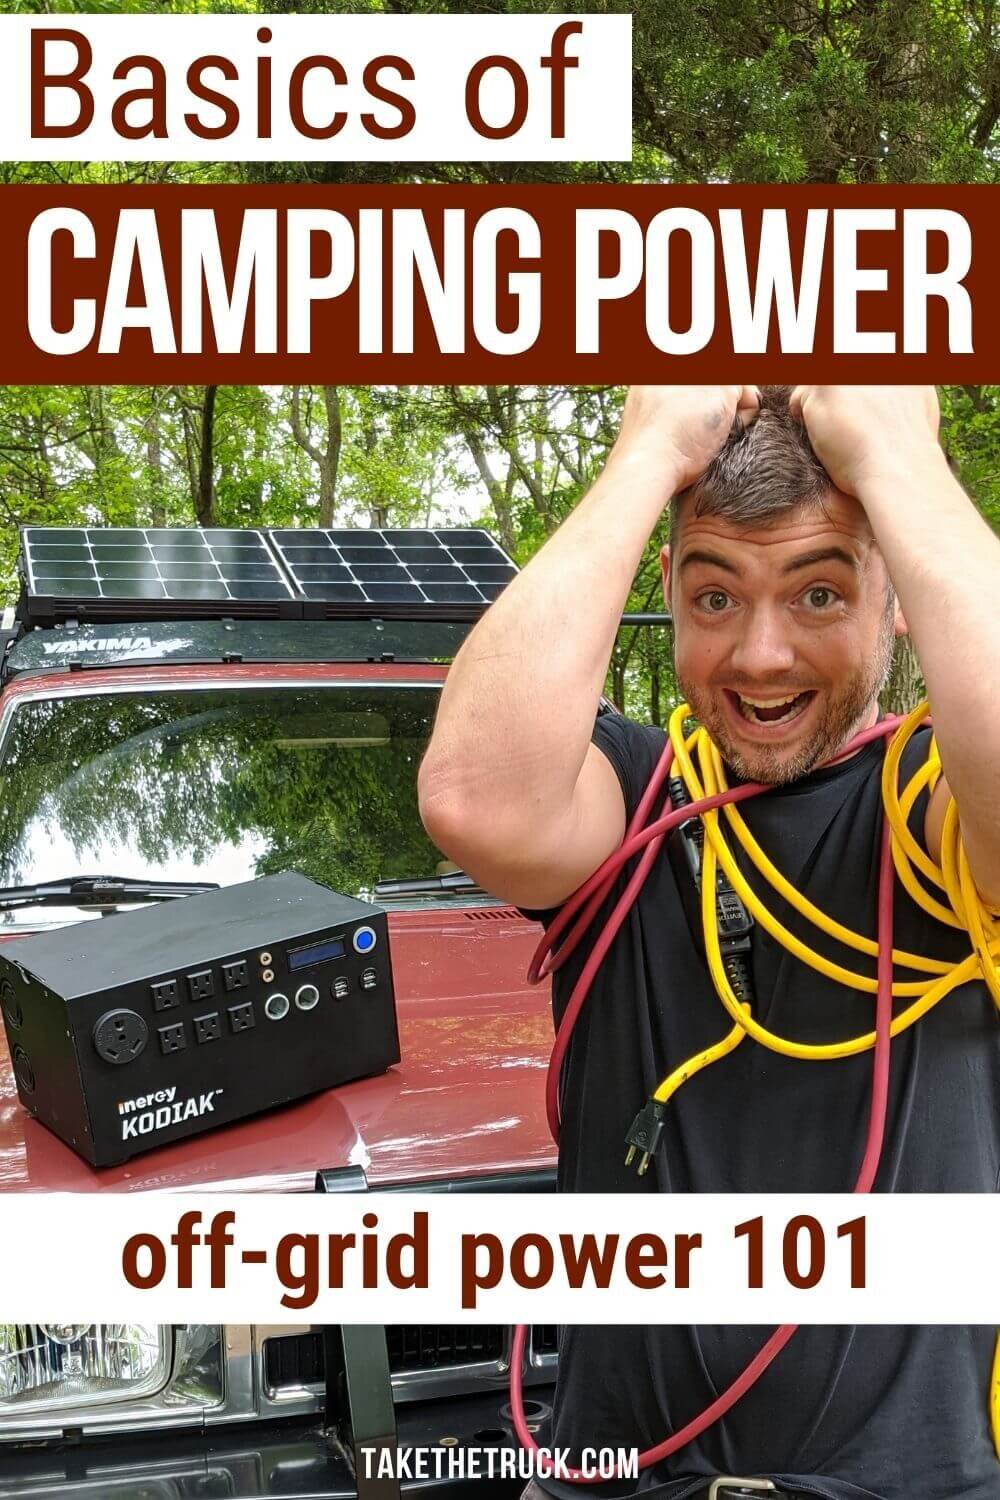 Camping power and electrical terms made easy to understand and apply to your van build, truck bed camper, or other camper (watts, amps, amp hours, watt hours, volts, AC and DC power).